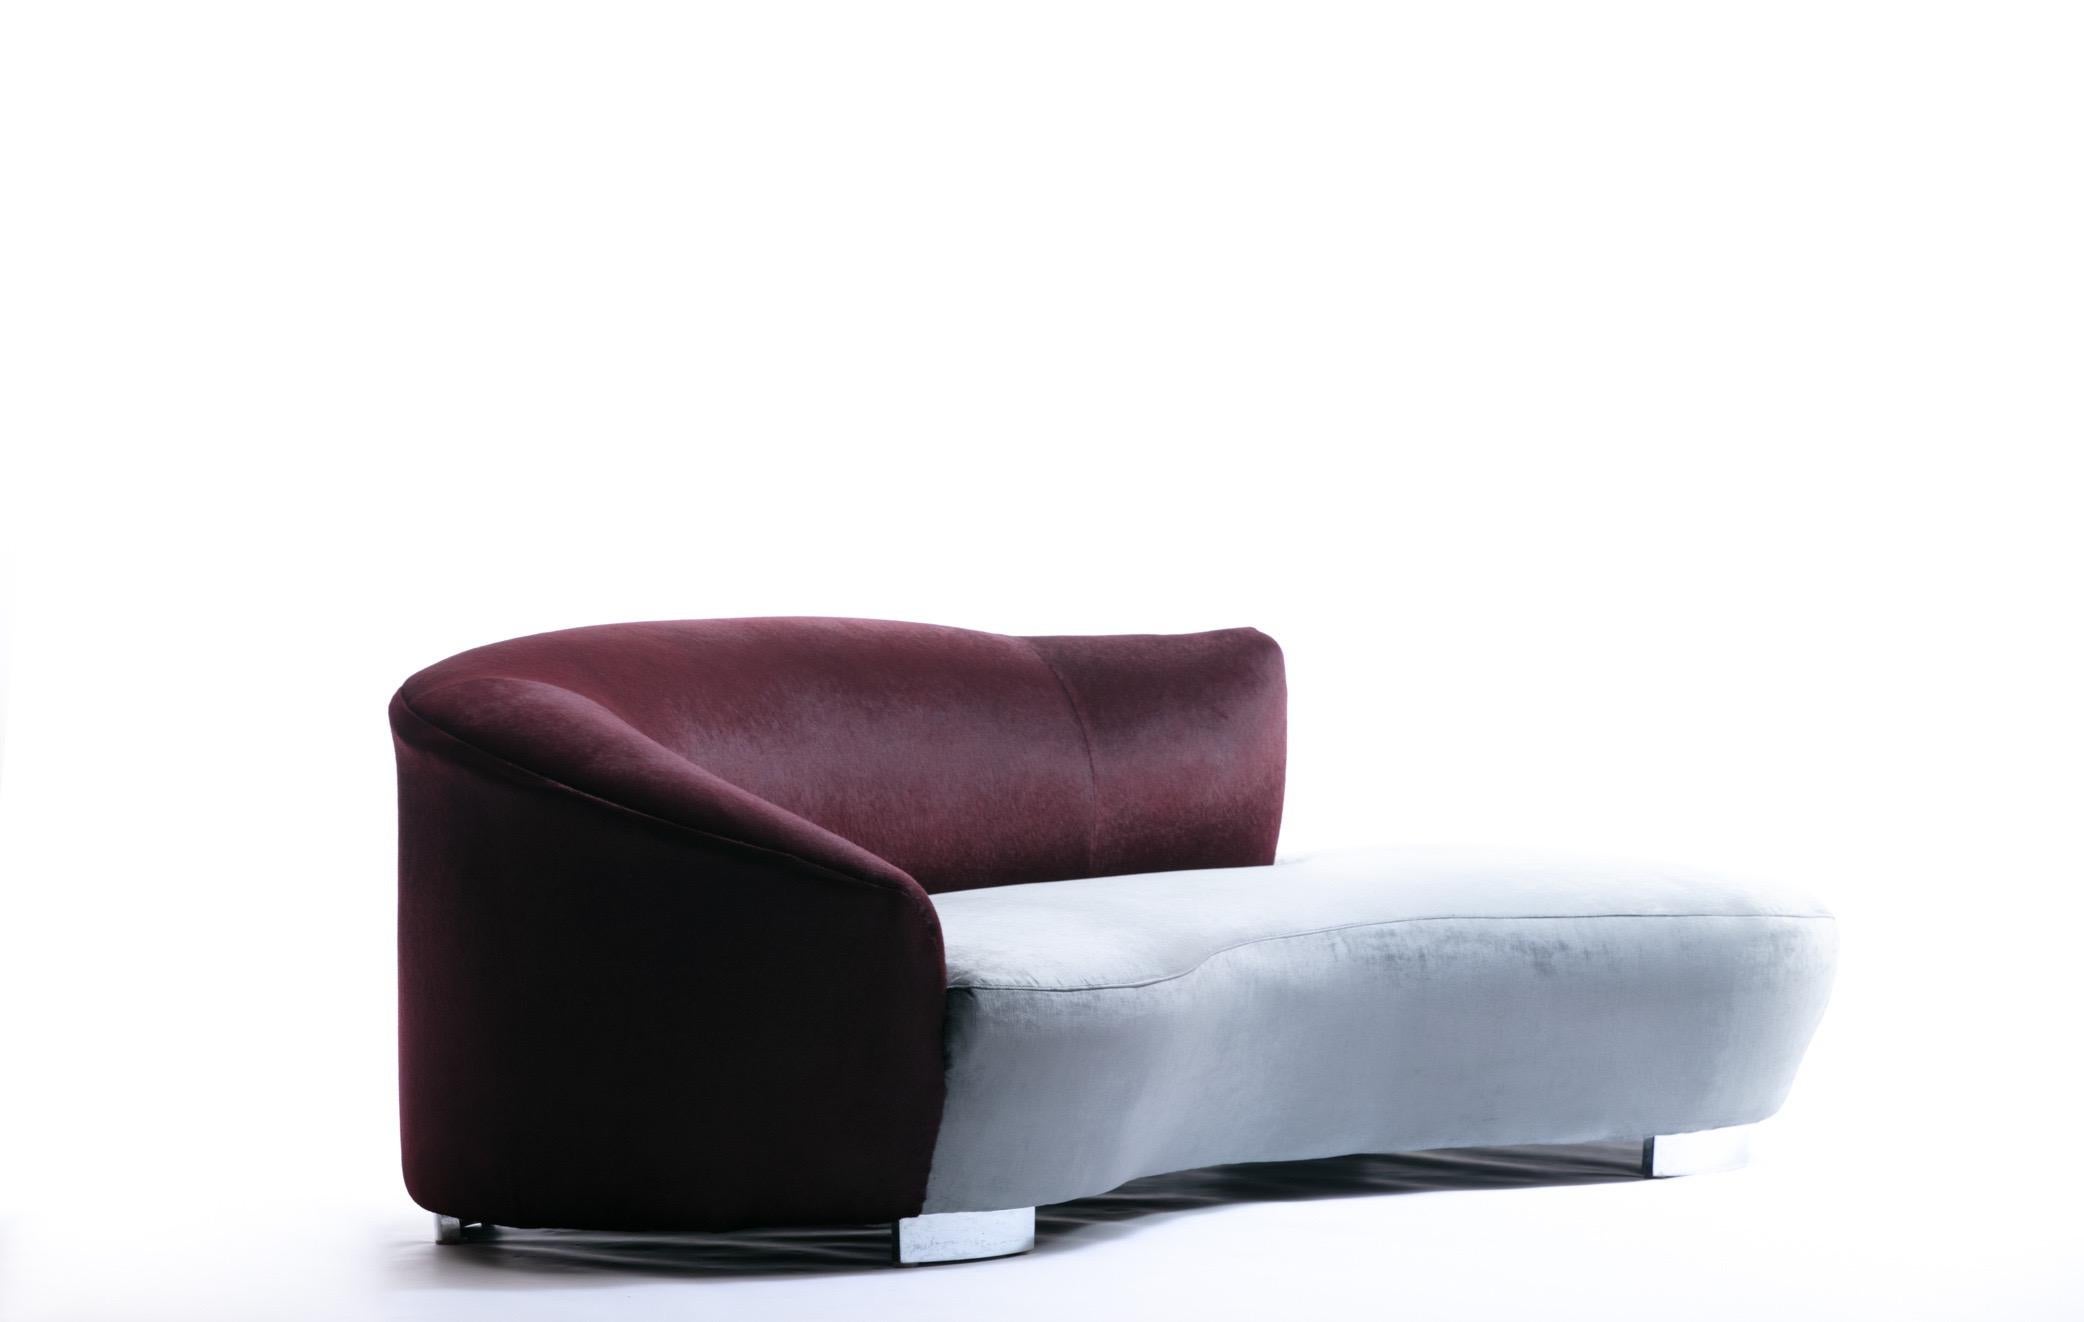 Classic Vladimir Kagan cloud sofa by Directional featuring two-tone reupholstery that highlights the iconic Kagan curves he's so well known for. The sofa back features a claret red faux cowhide that is deep in color with a soft cowhide-like texture.